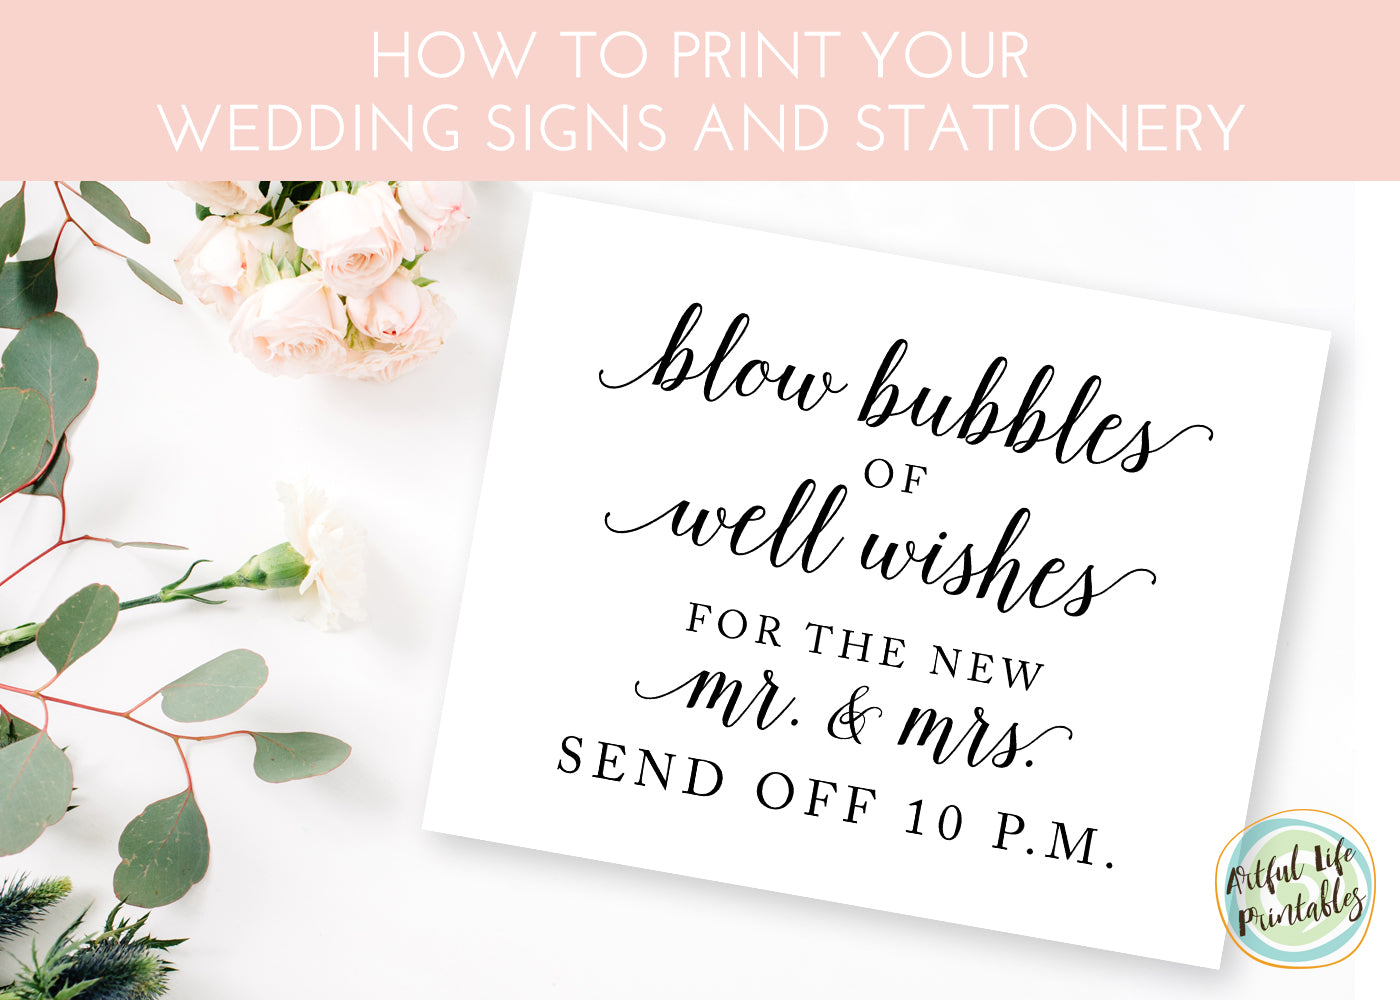 How to Print your Wedding Signs and Stationery, well wishes sign